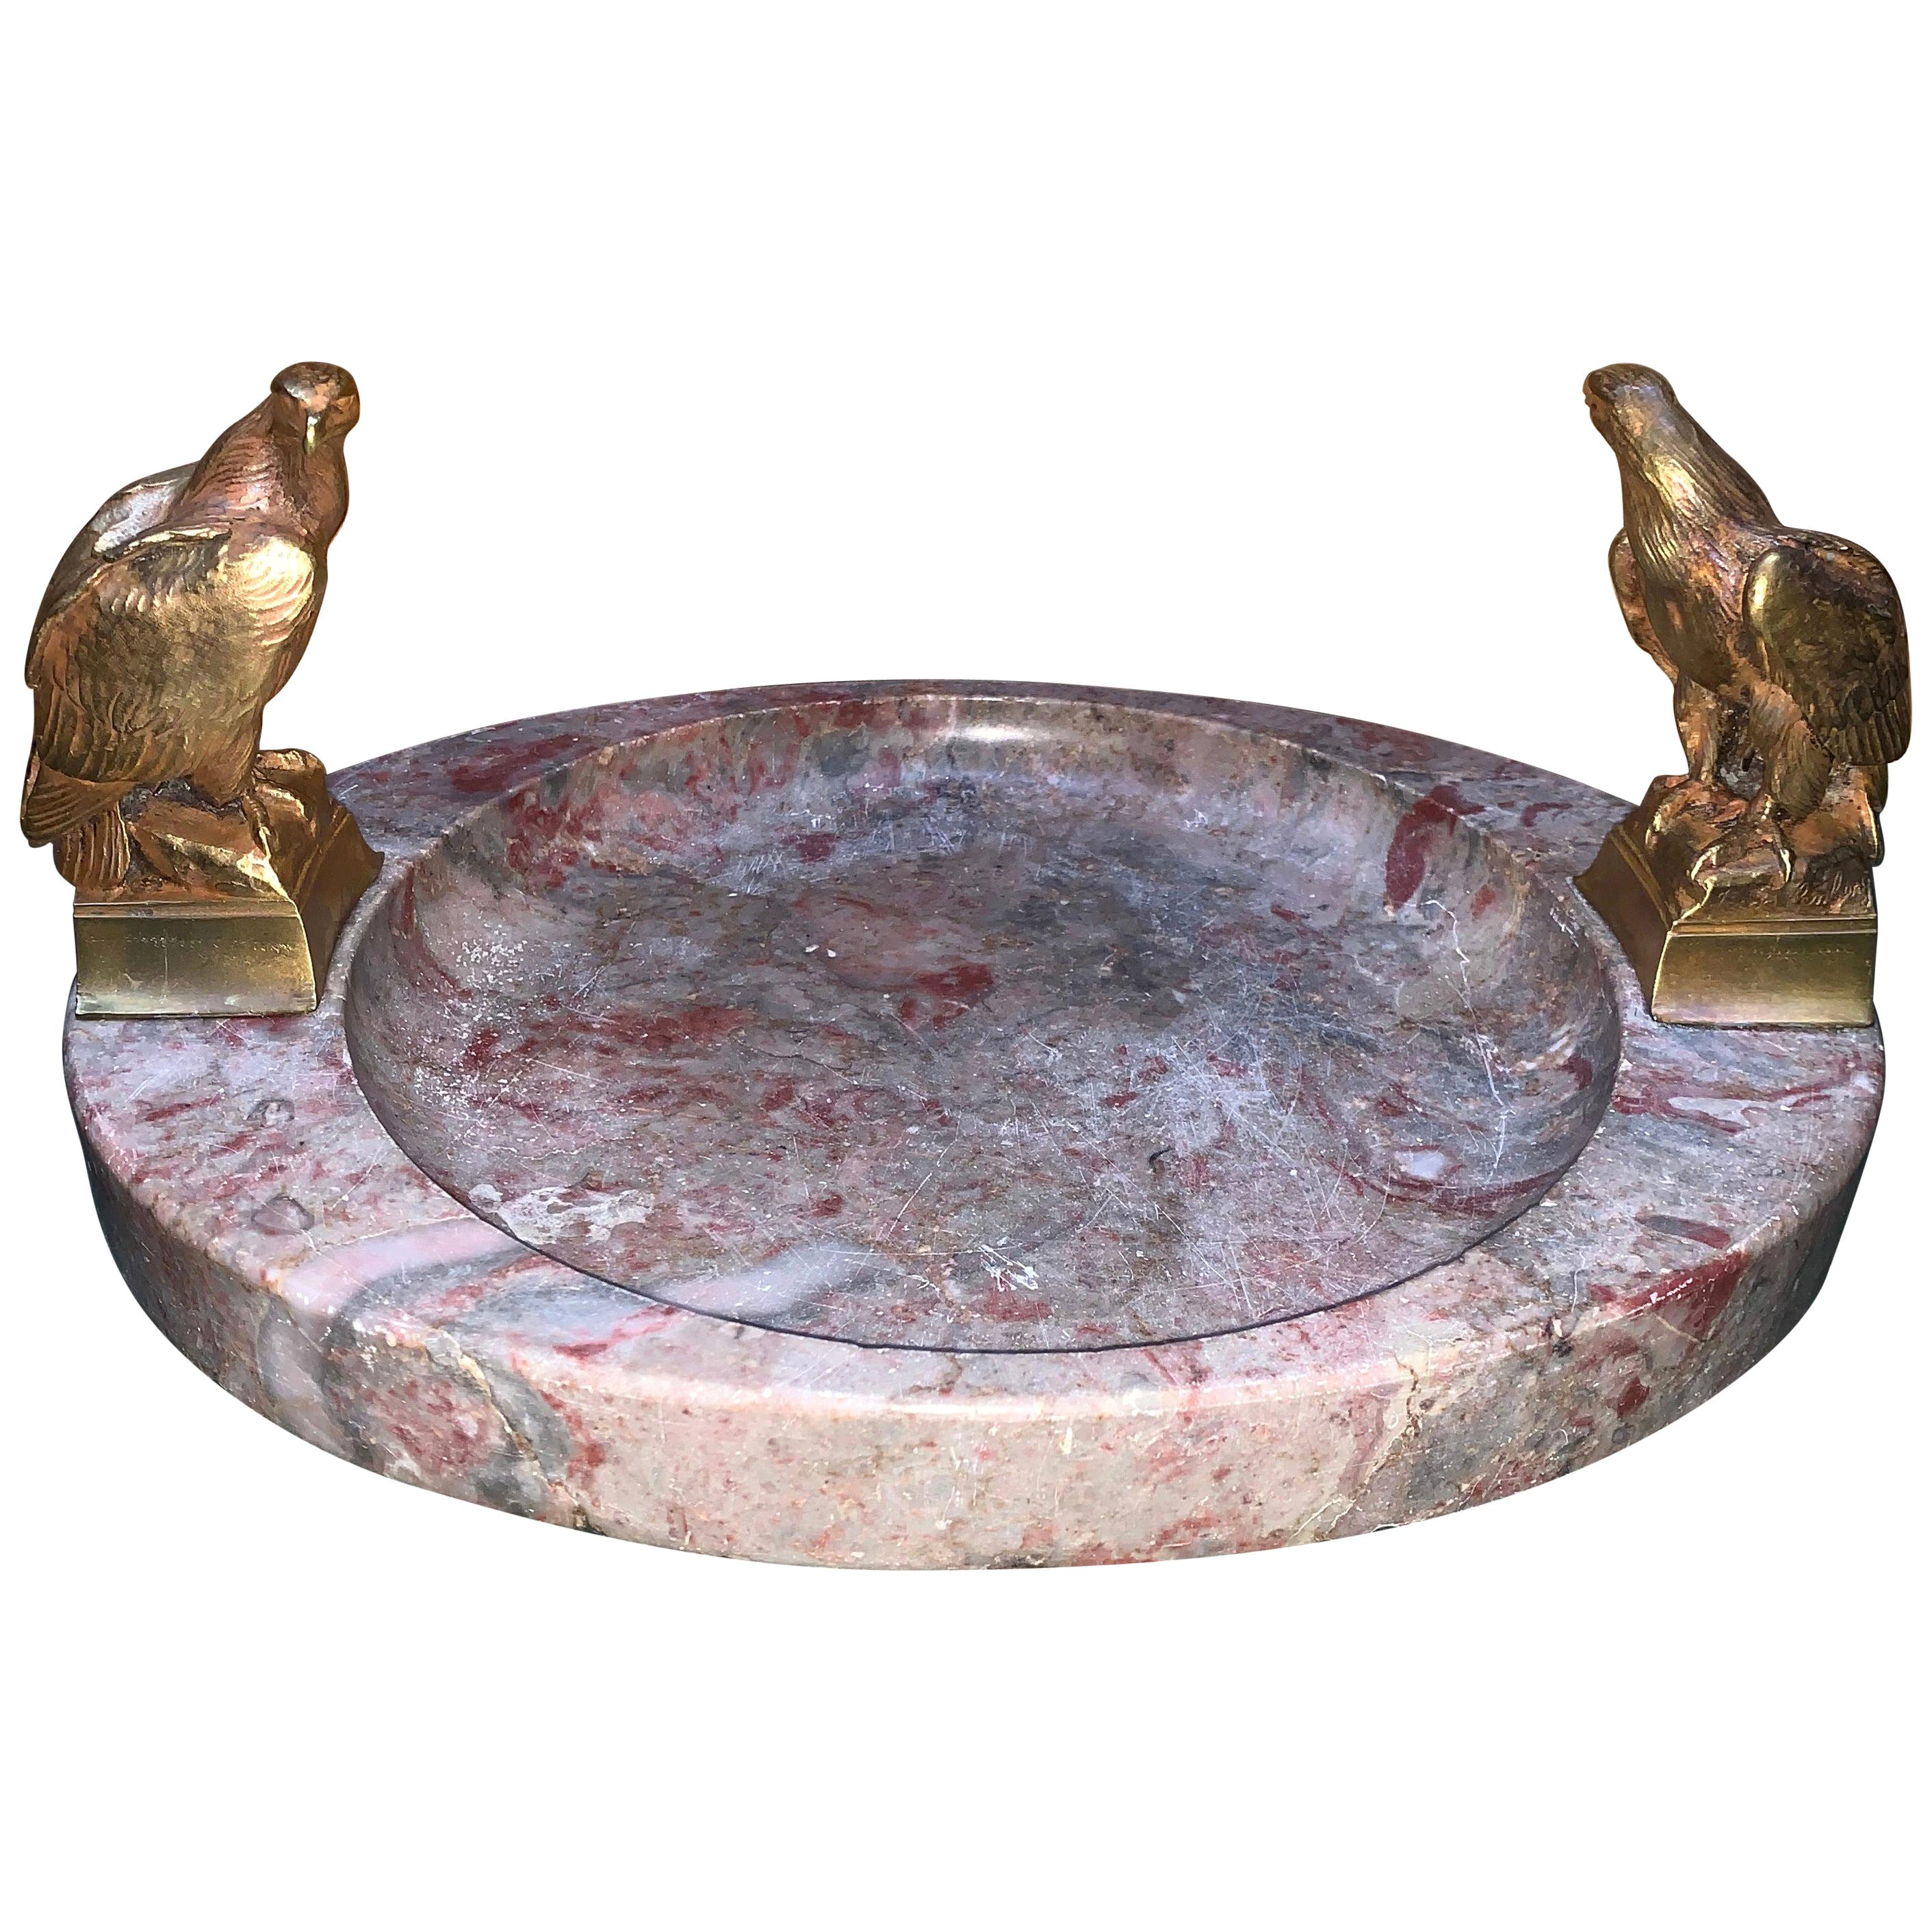 Large Signed Oval Marble Ashtray or Centerpiece With Two-Bronze Eagles